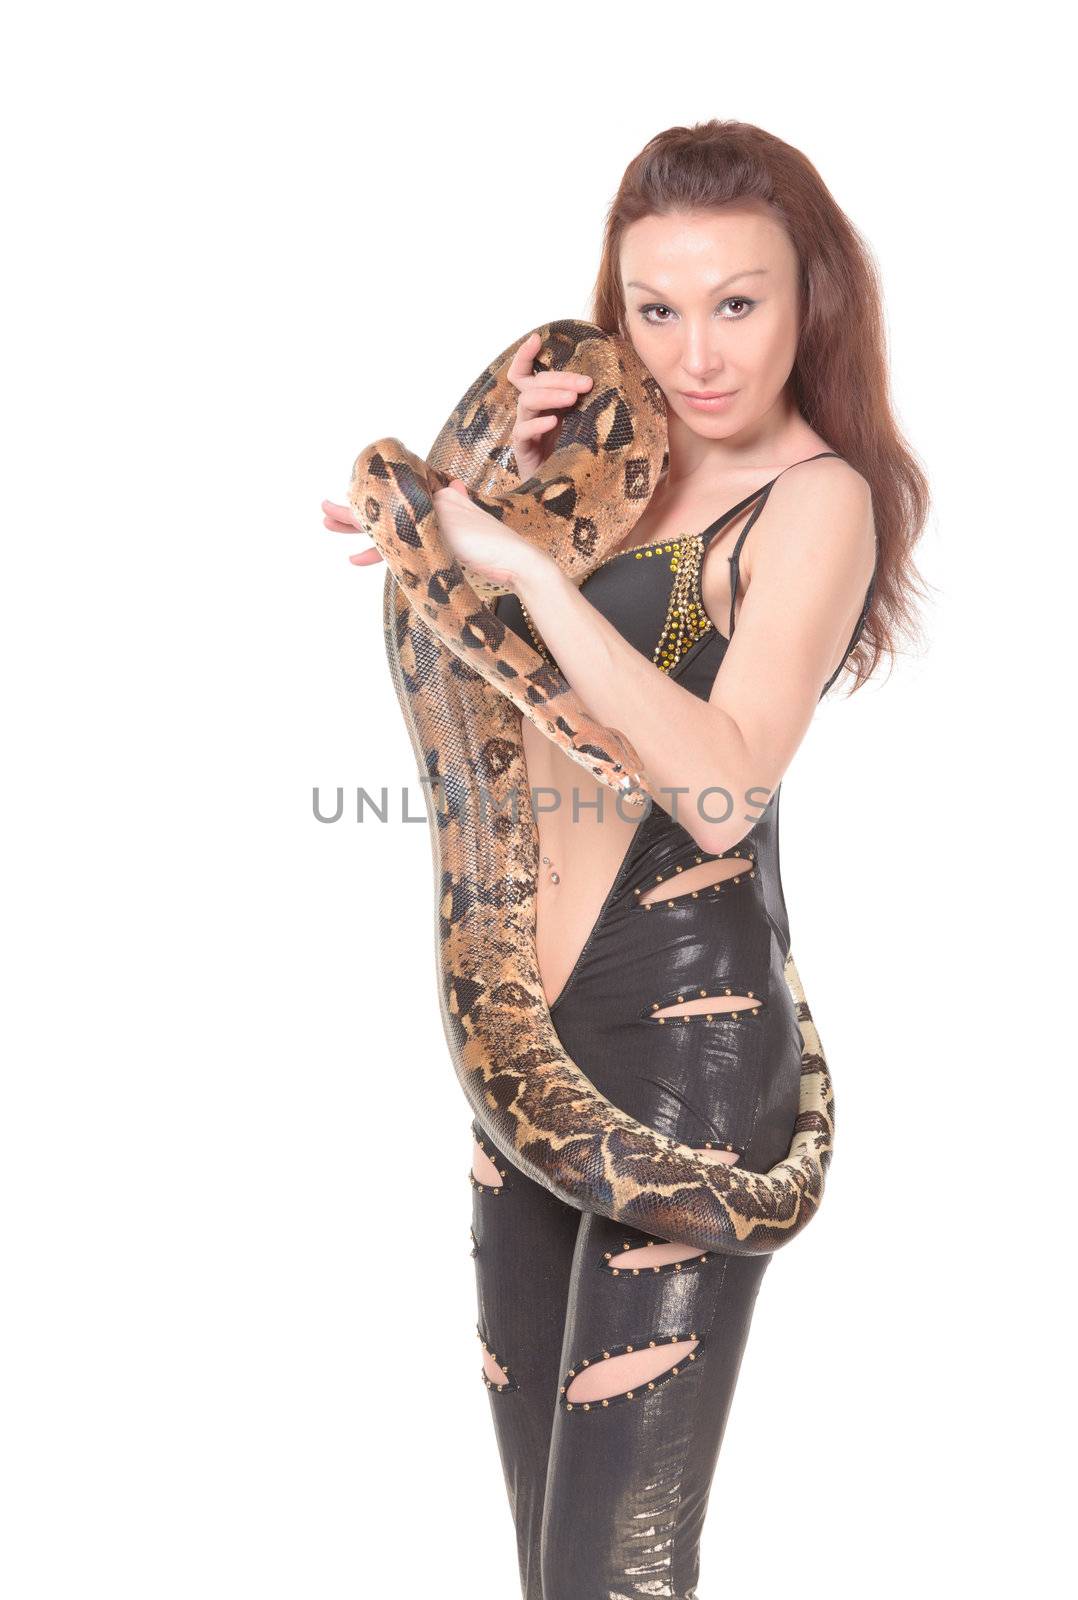 Sexy attractive young woman in leathers posing with her boa wound round her body